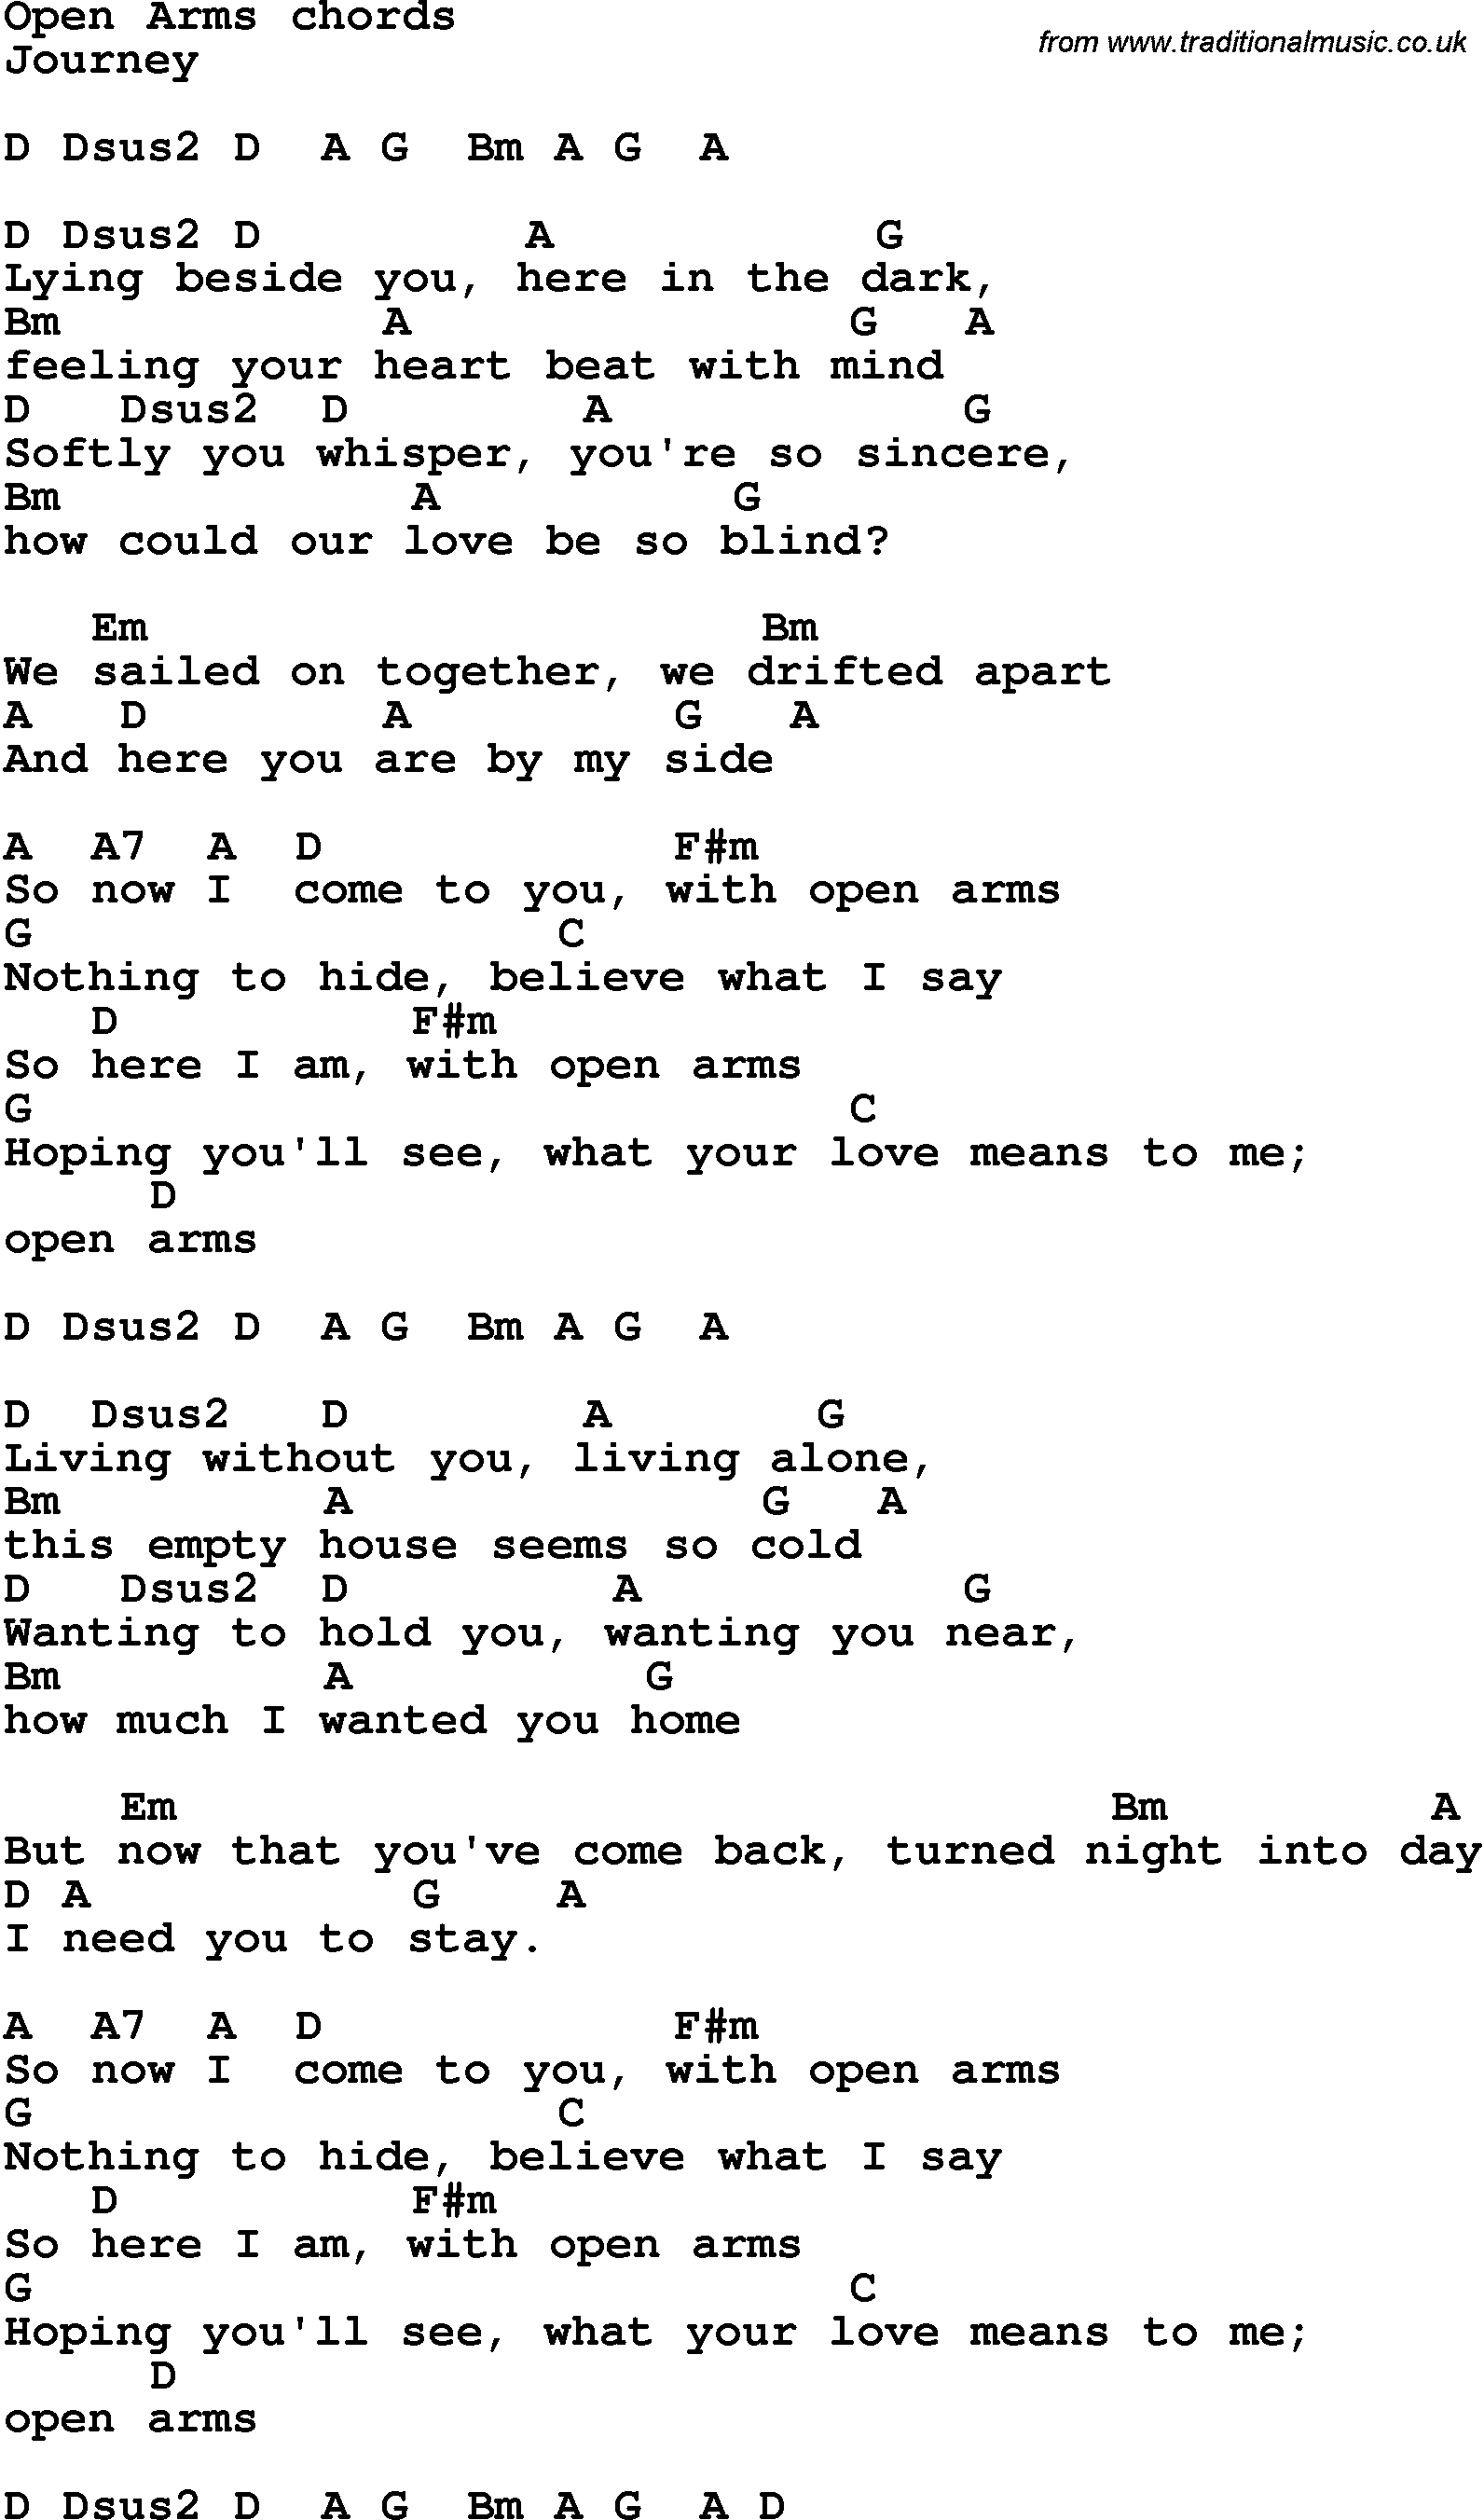 Song Lyrics with guitar chords for Open Arms